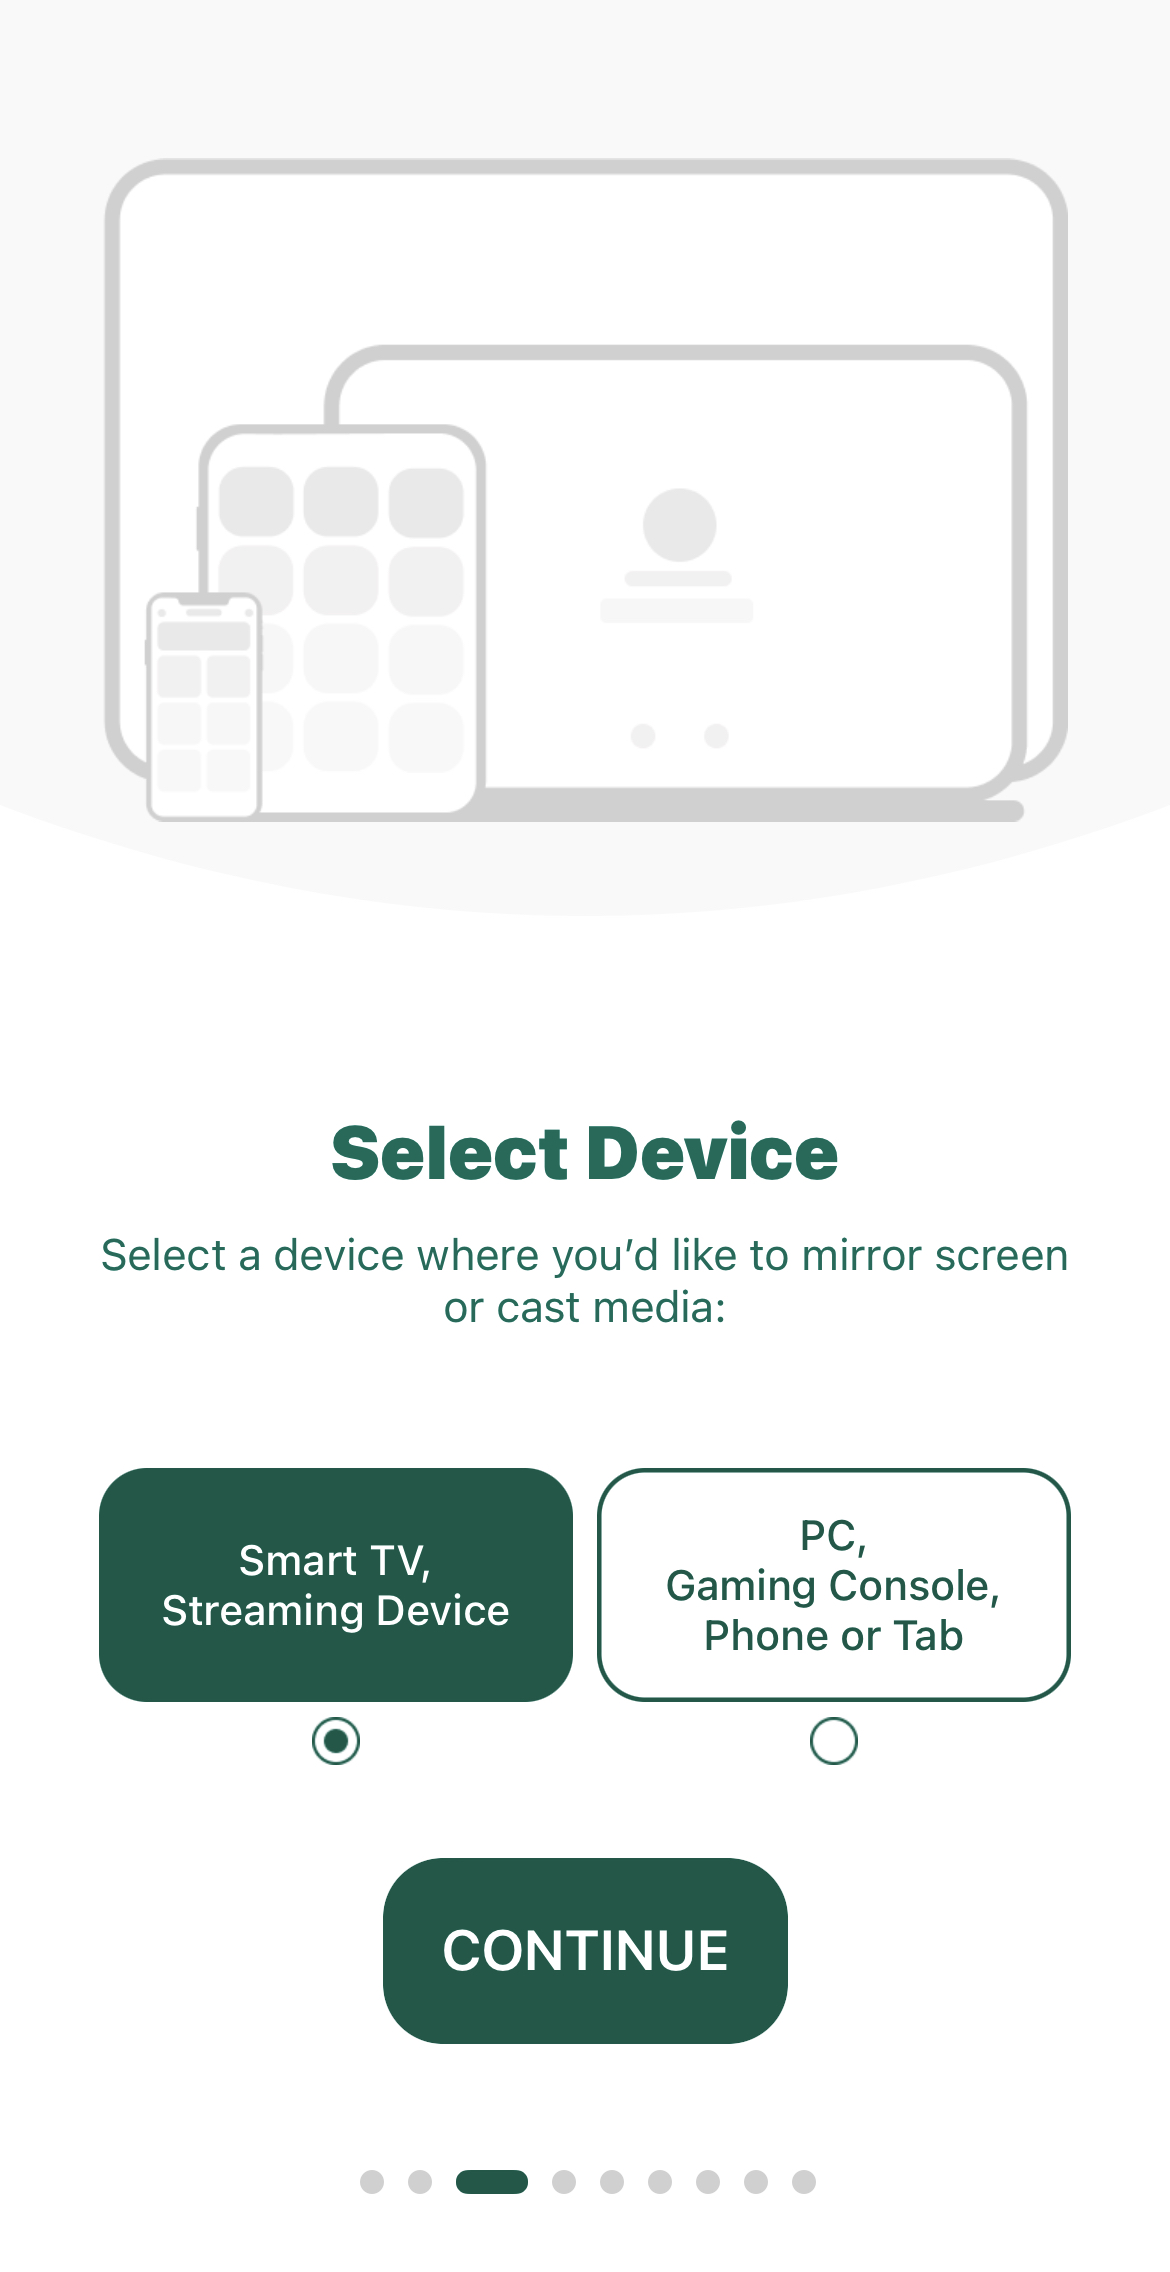 Choosing a streaming device on a third-party app